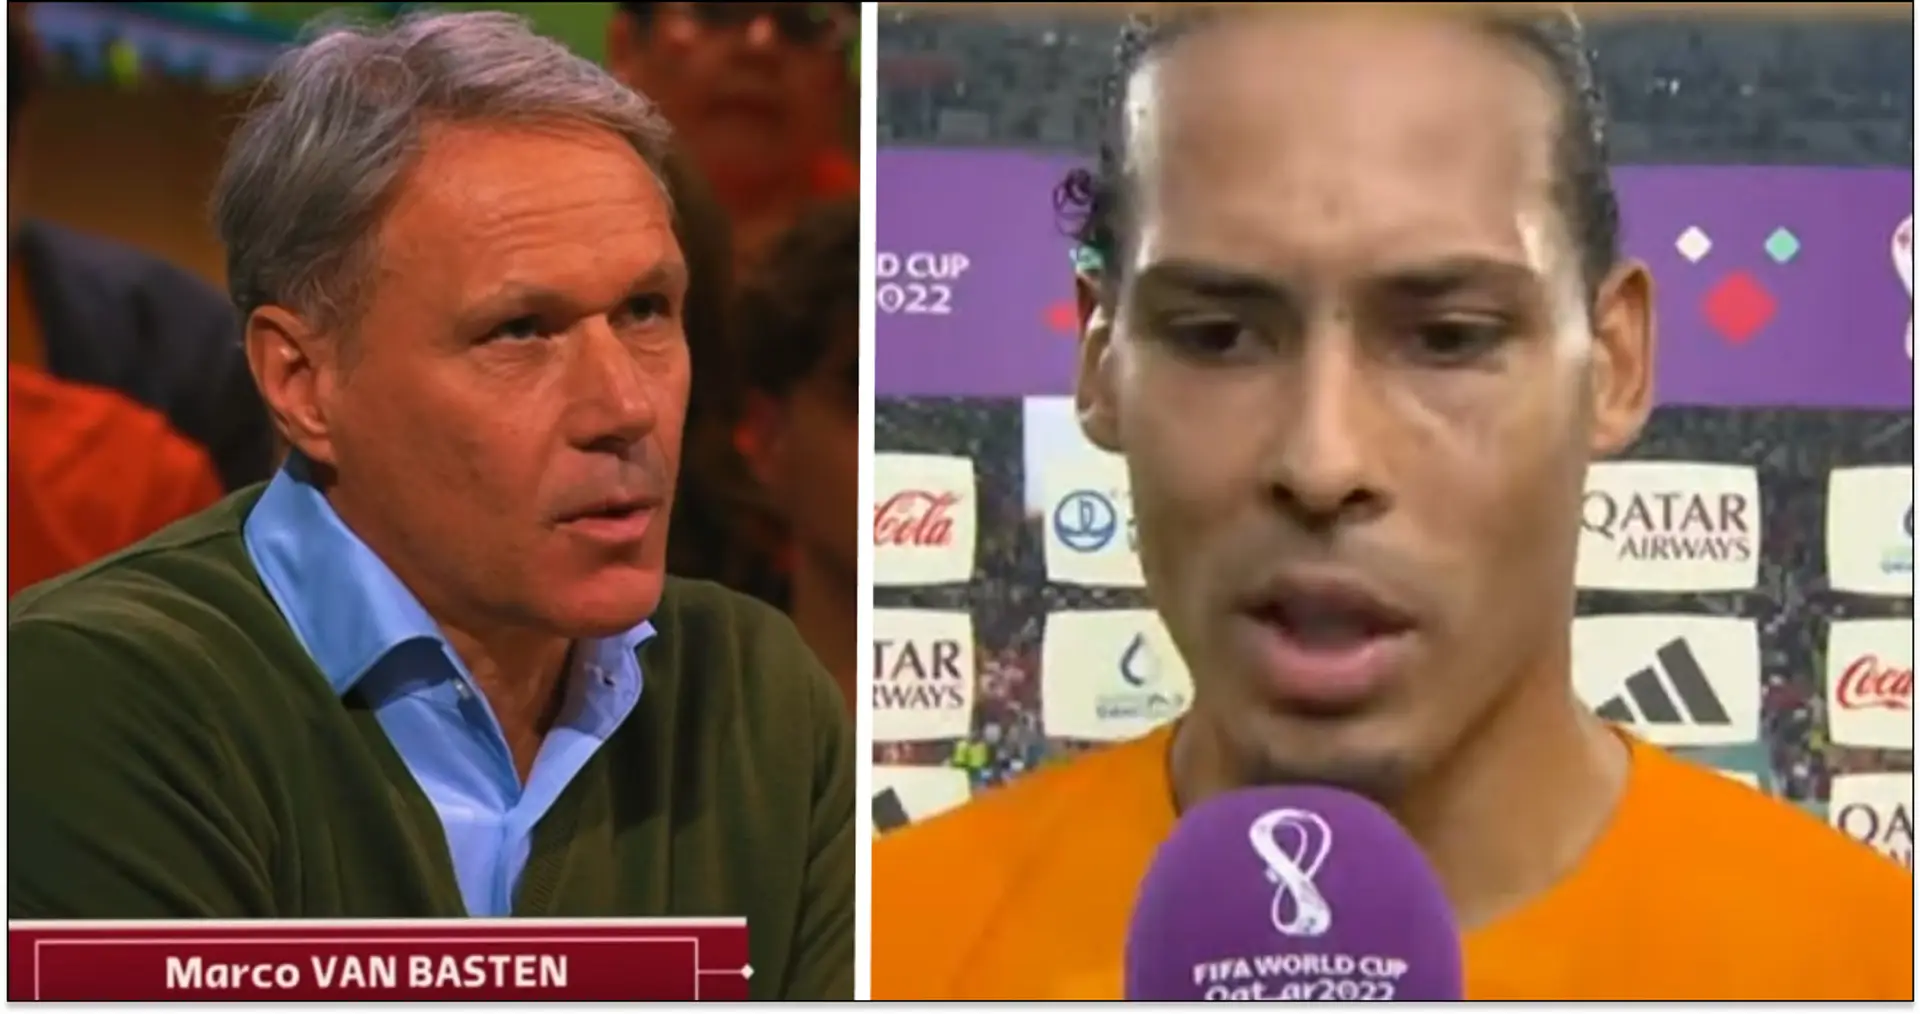 'Attack on me as a person': Van Dijk hits out at Van Basten after poor leadership remarks